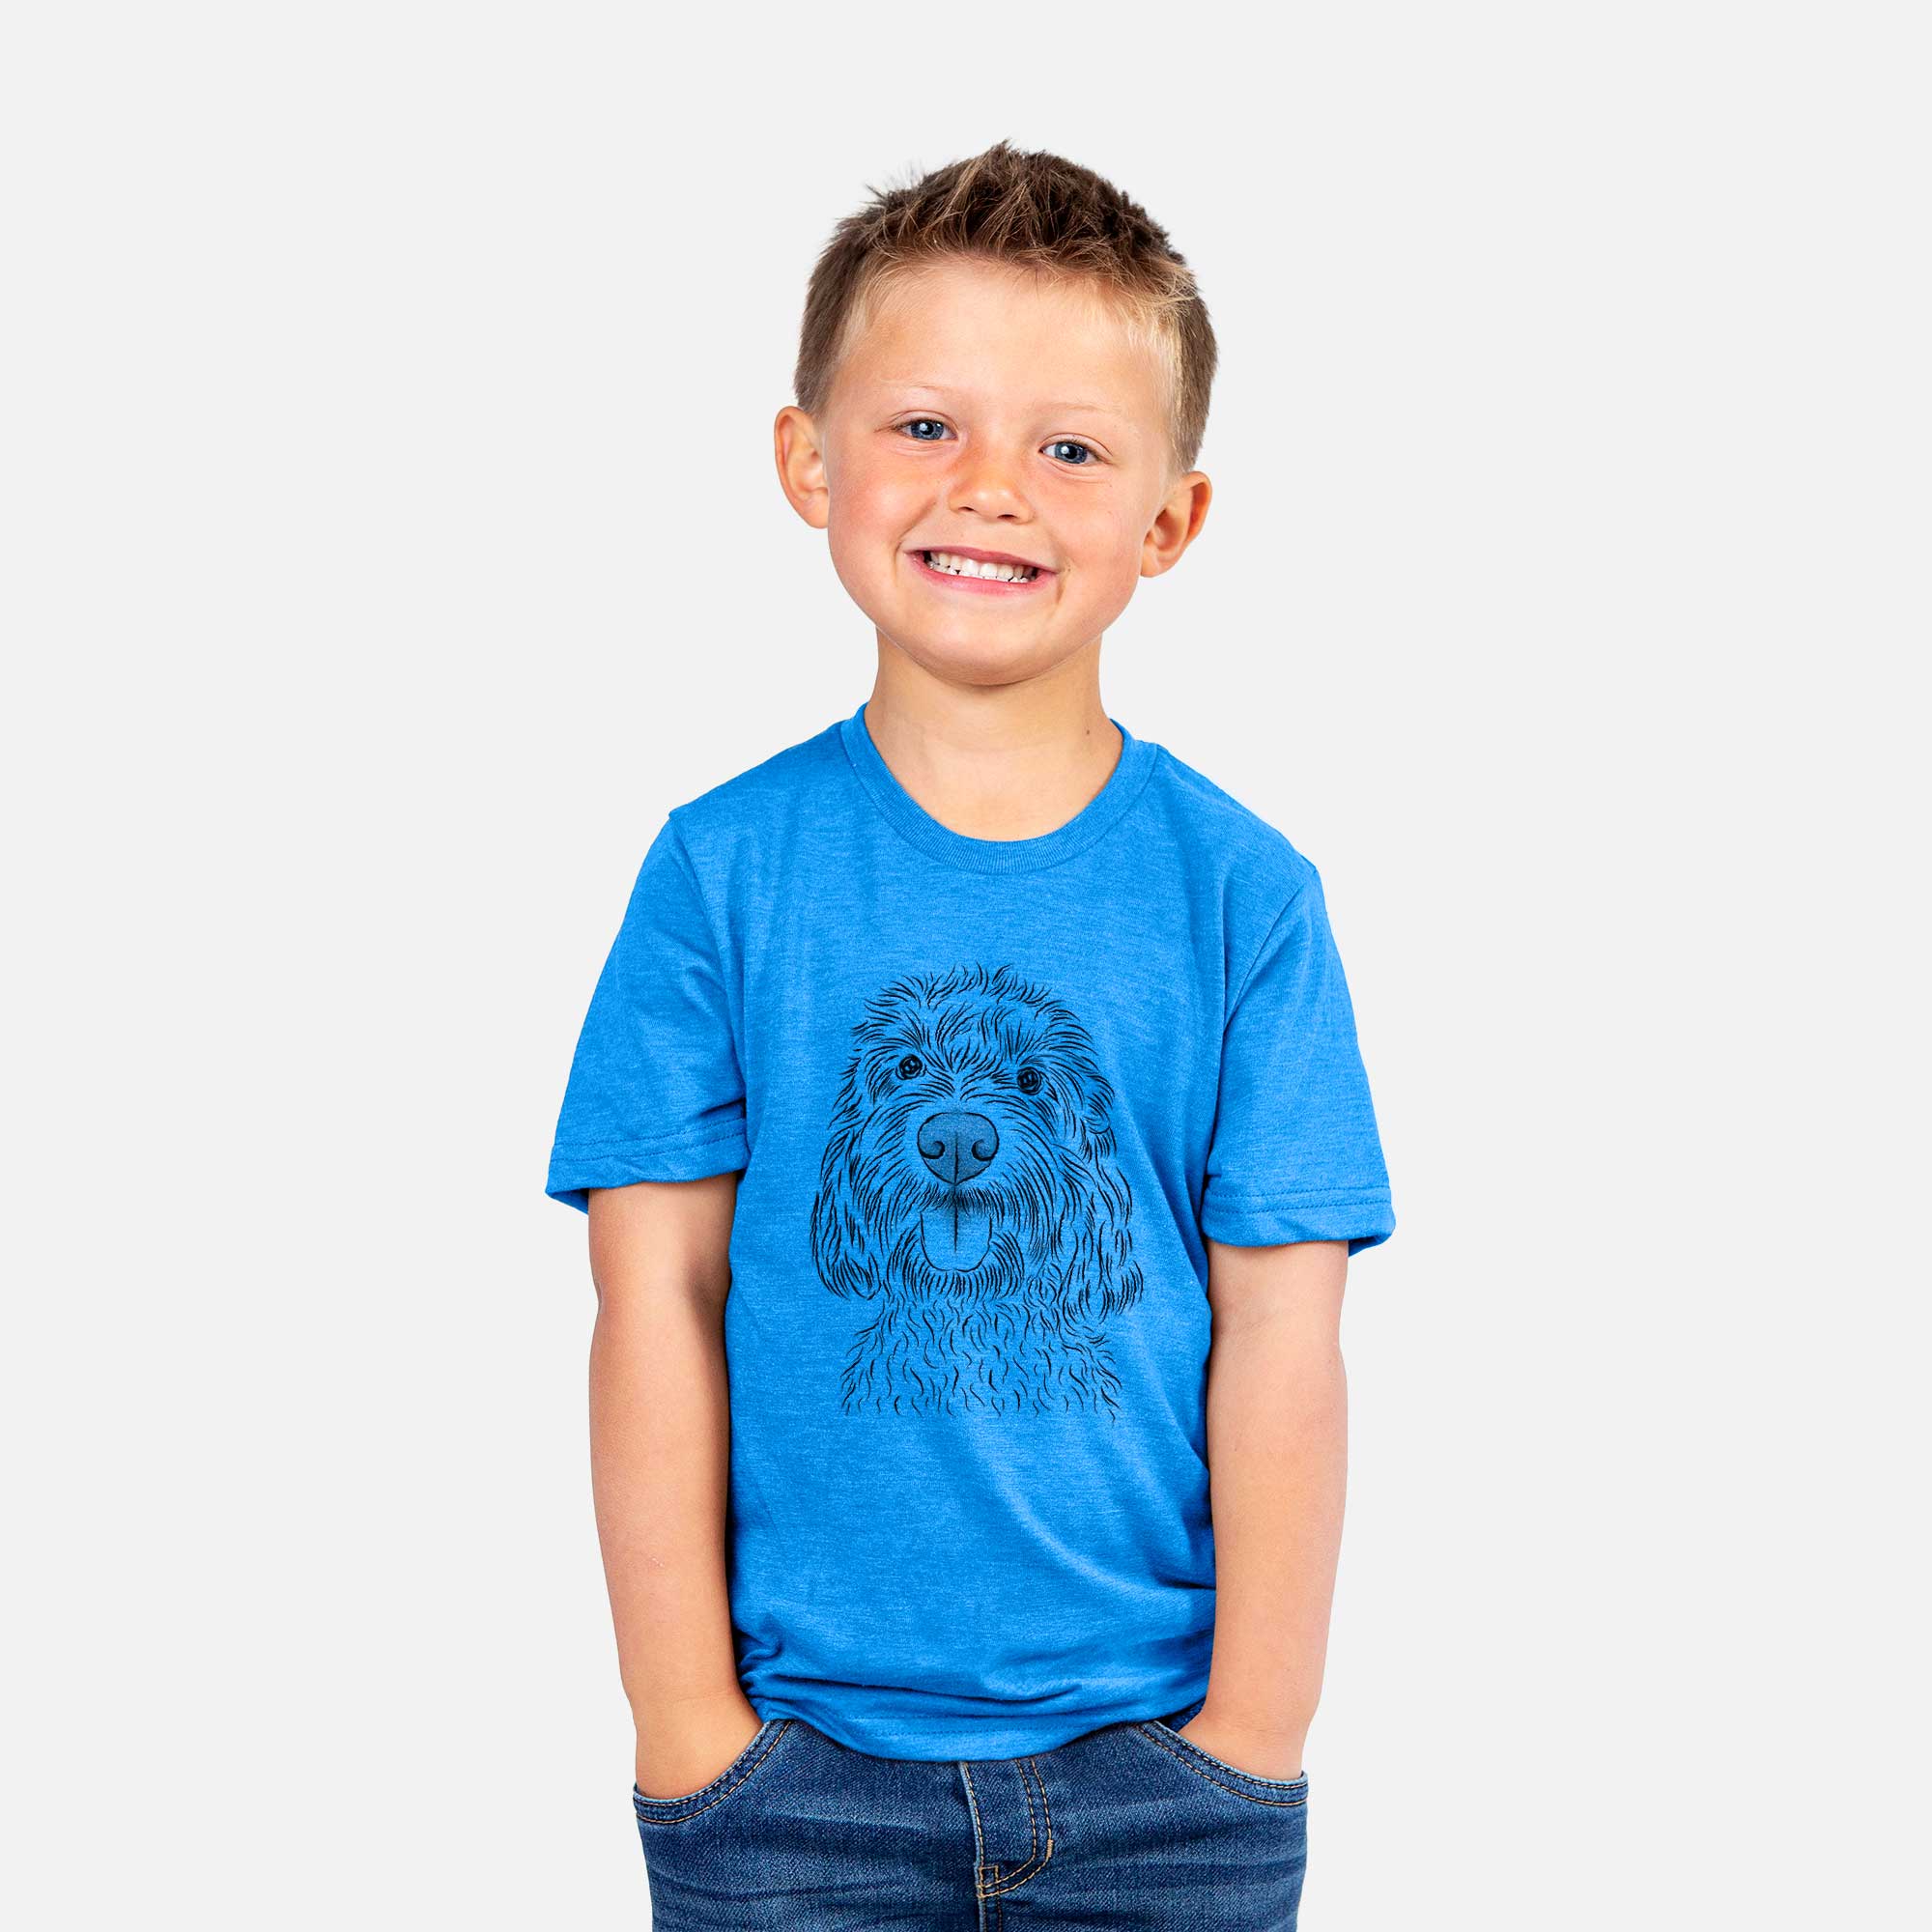 Bare Clover the Cockapoo - Kids/Youth/Toddler Shirt